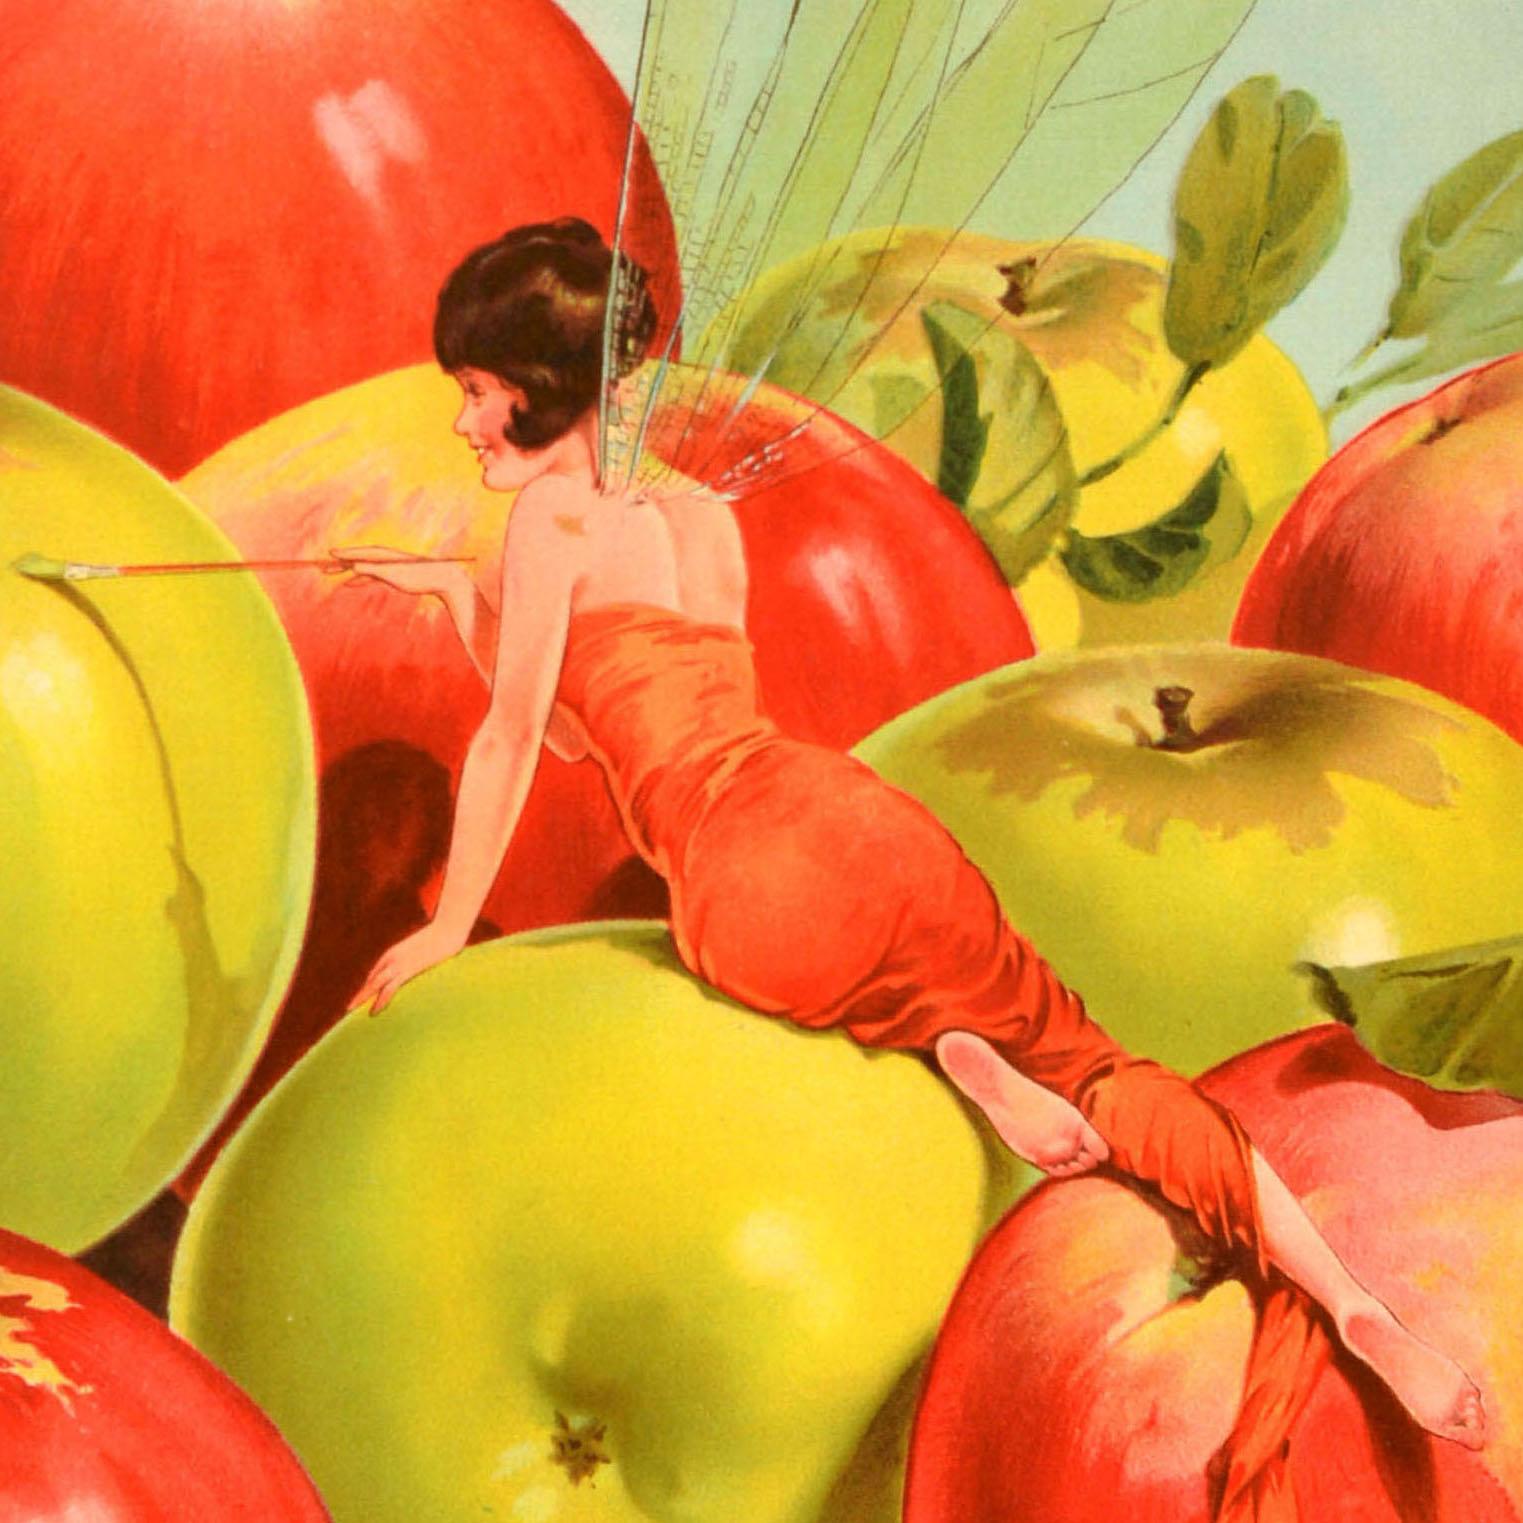 Original Vintage Food Advertising Poster Apples Finishing Touch Perfect Health - Print by Edward Cole